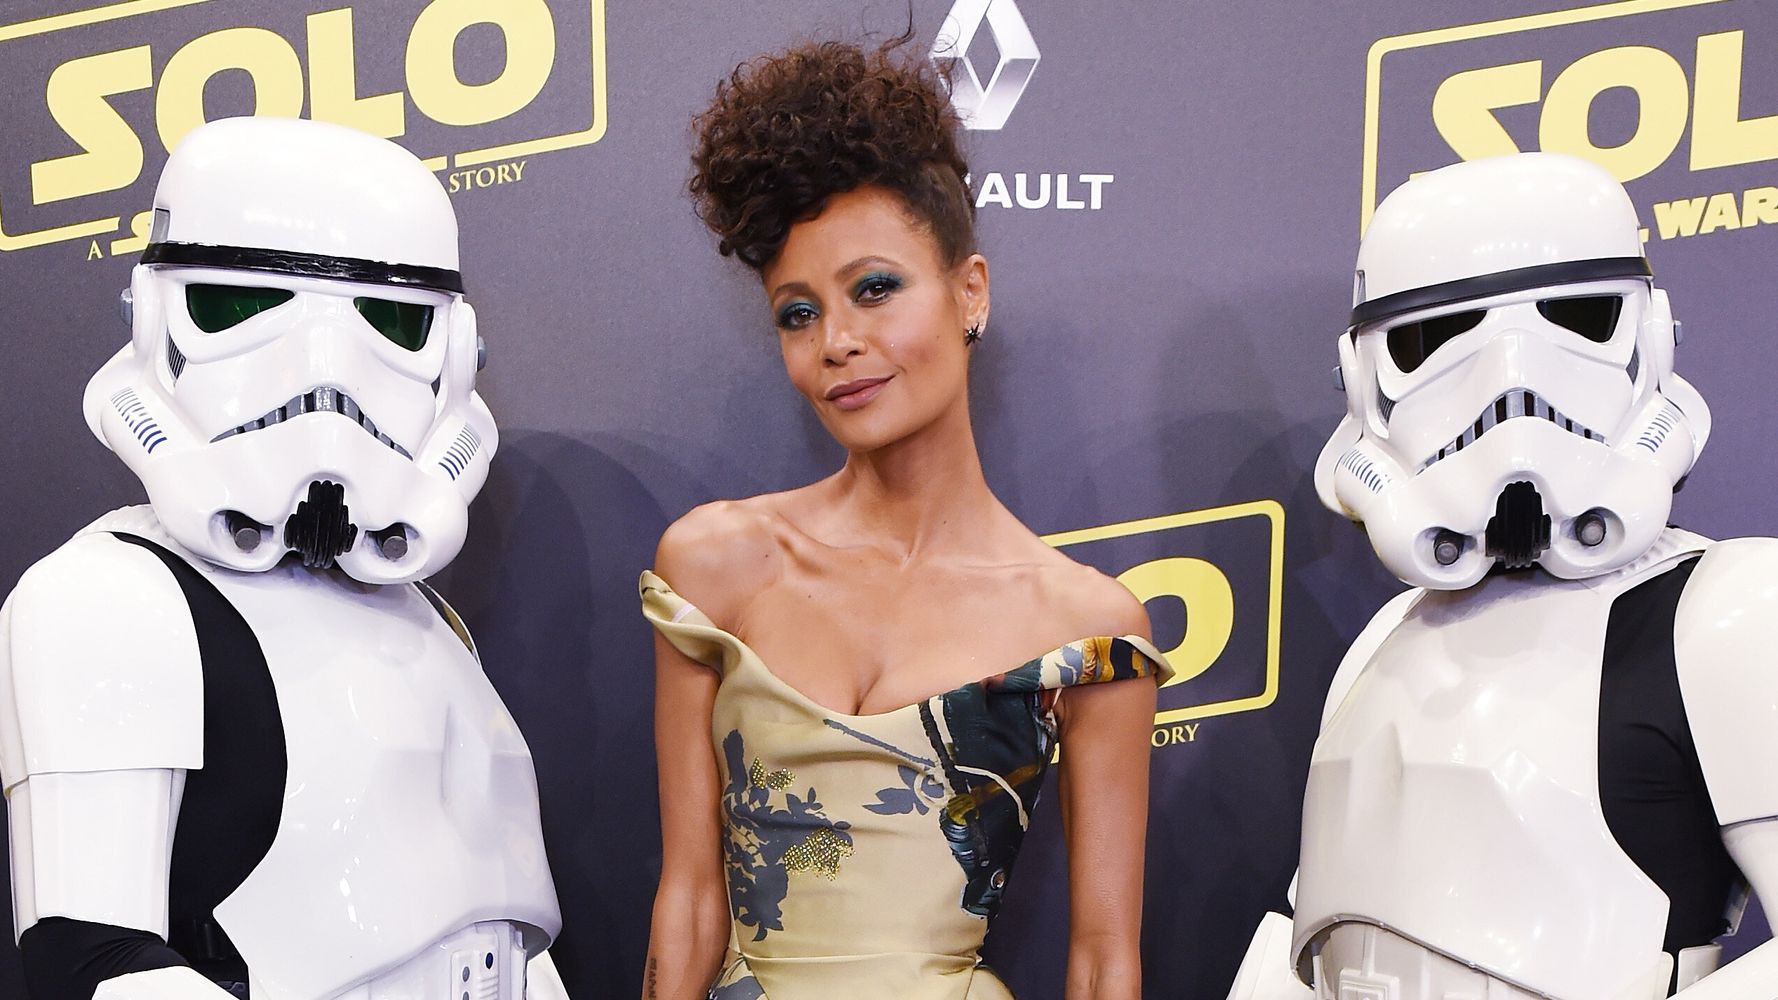 Thandiwe Newton Blasts 'Star Wars' For Killing Her Character: 'Are You F**king Joking?'